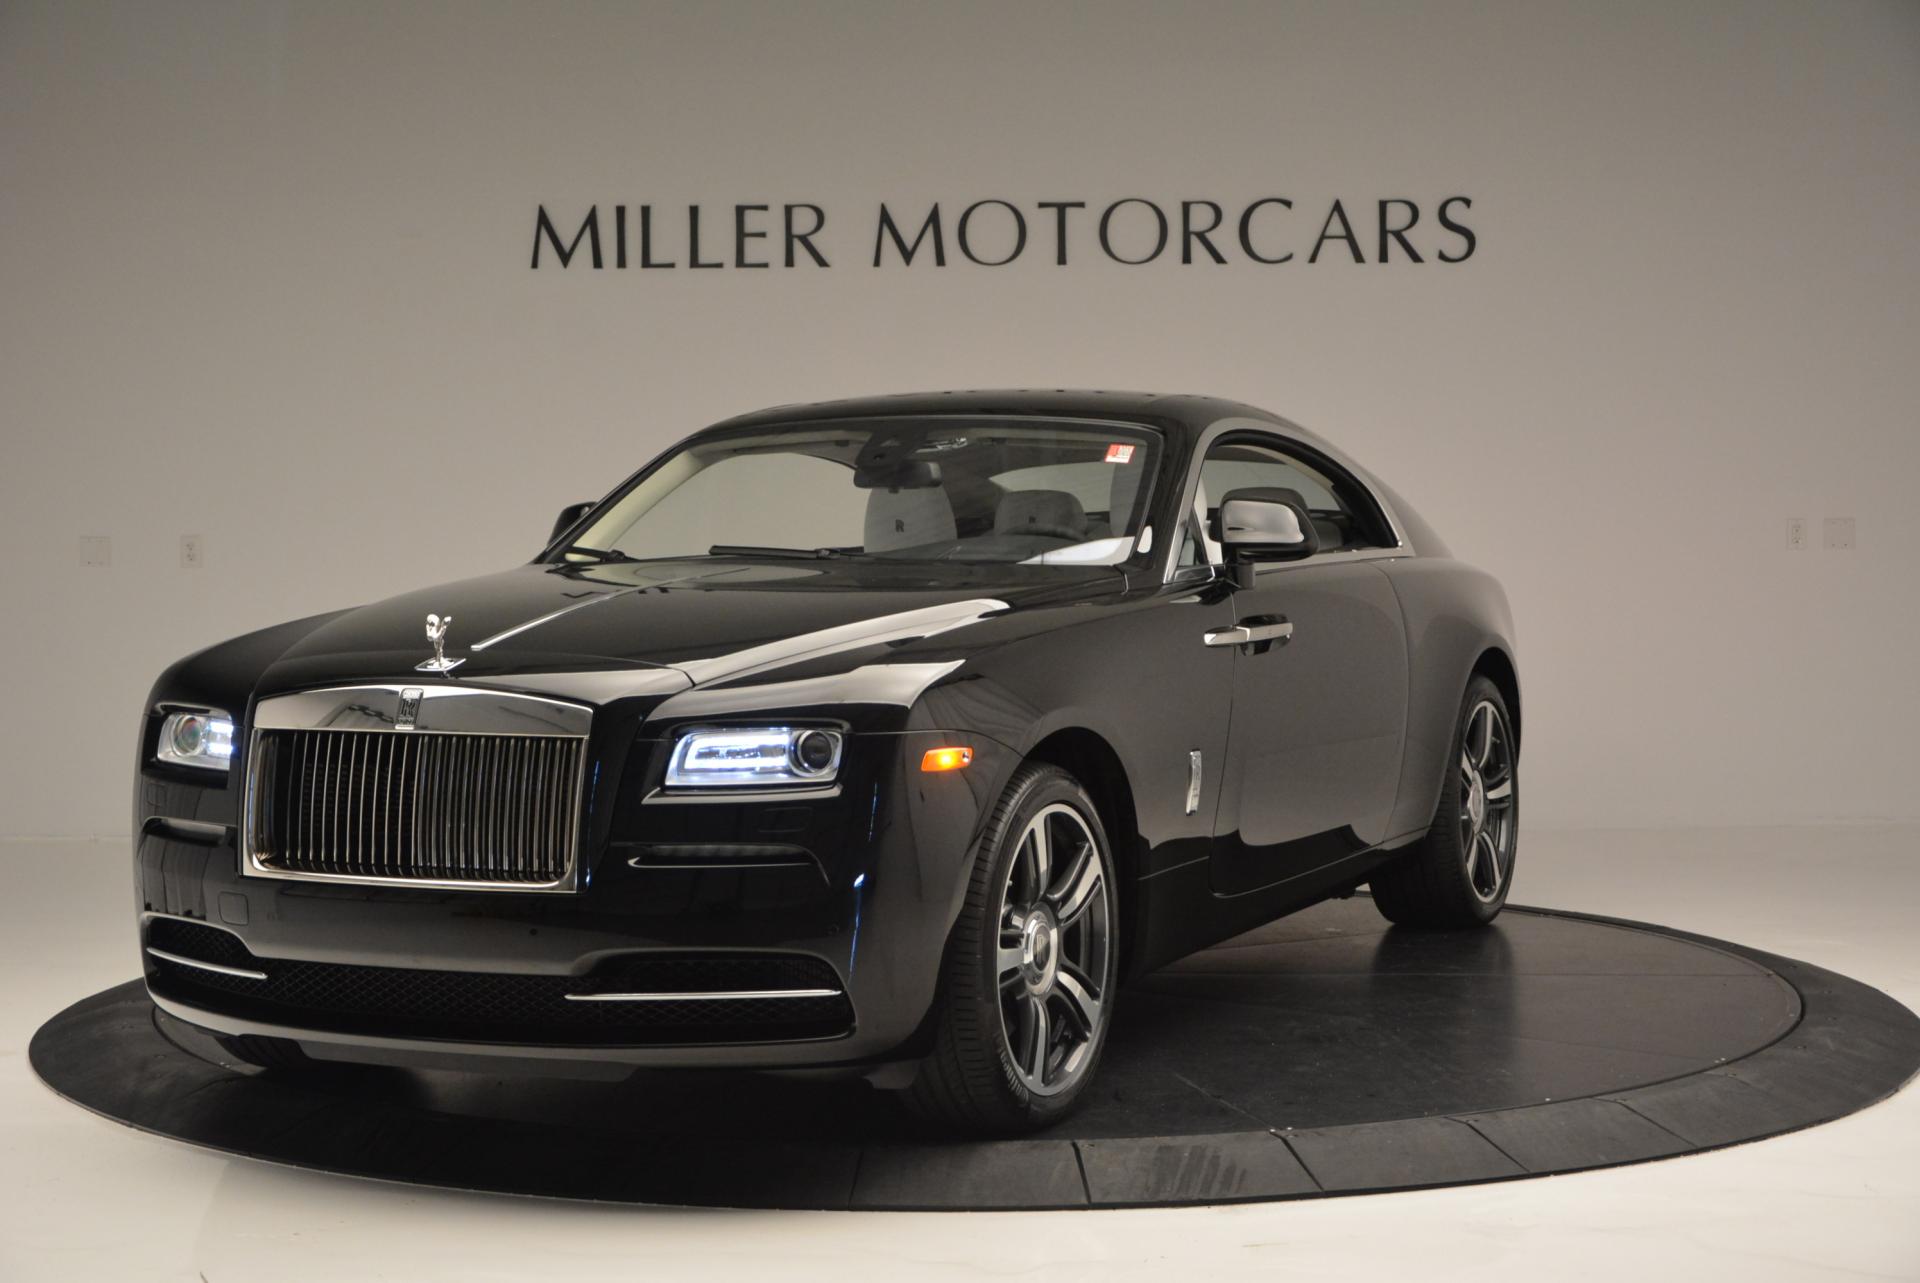 New 2016 Rolls-Royce Wraith for sale Sold at Maserati of Greenwich in Greenwich CT 06830 1